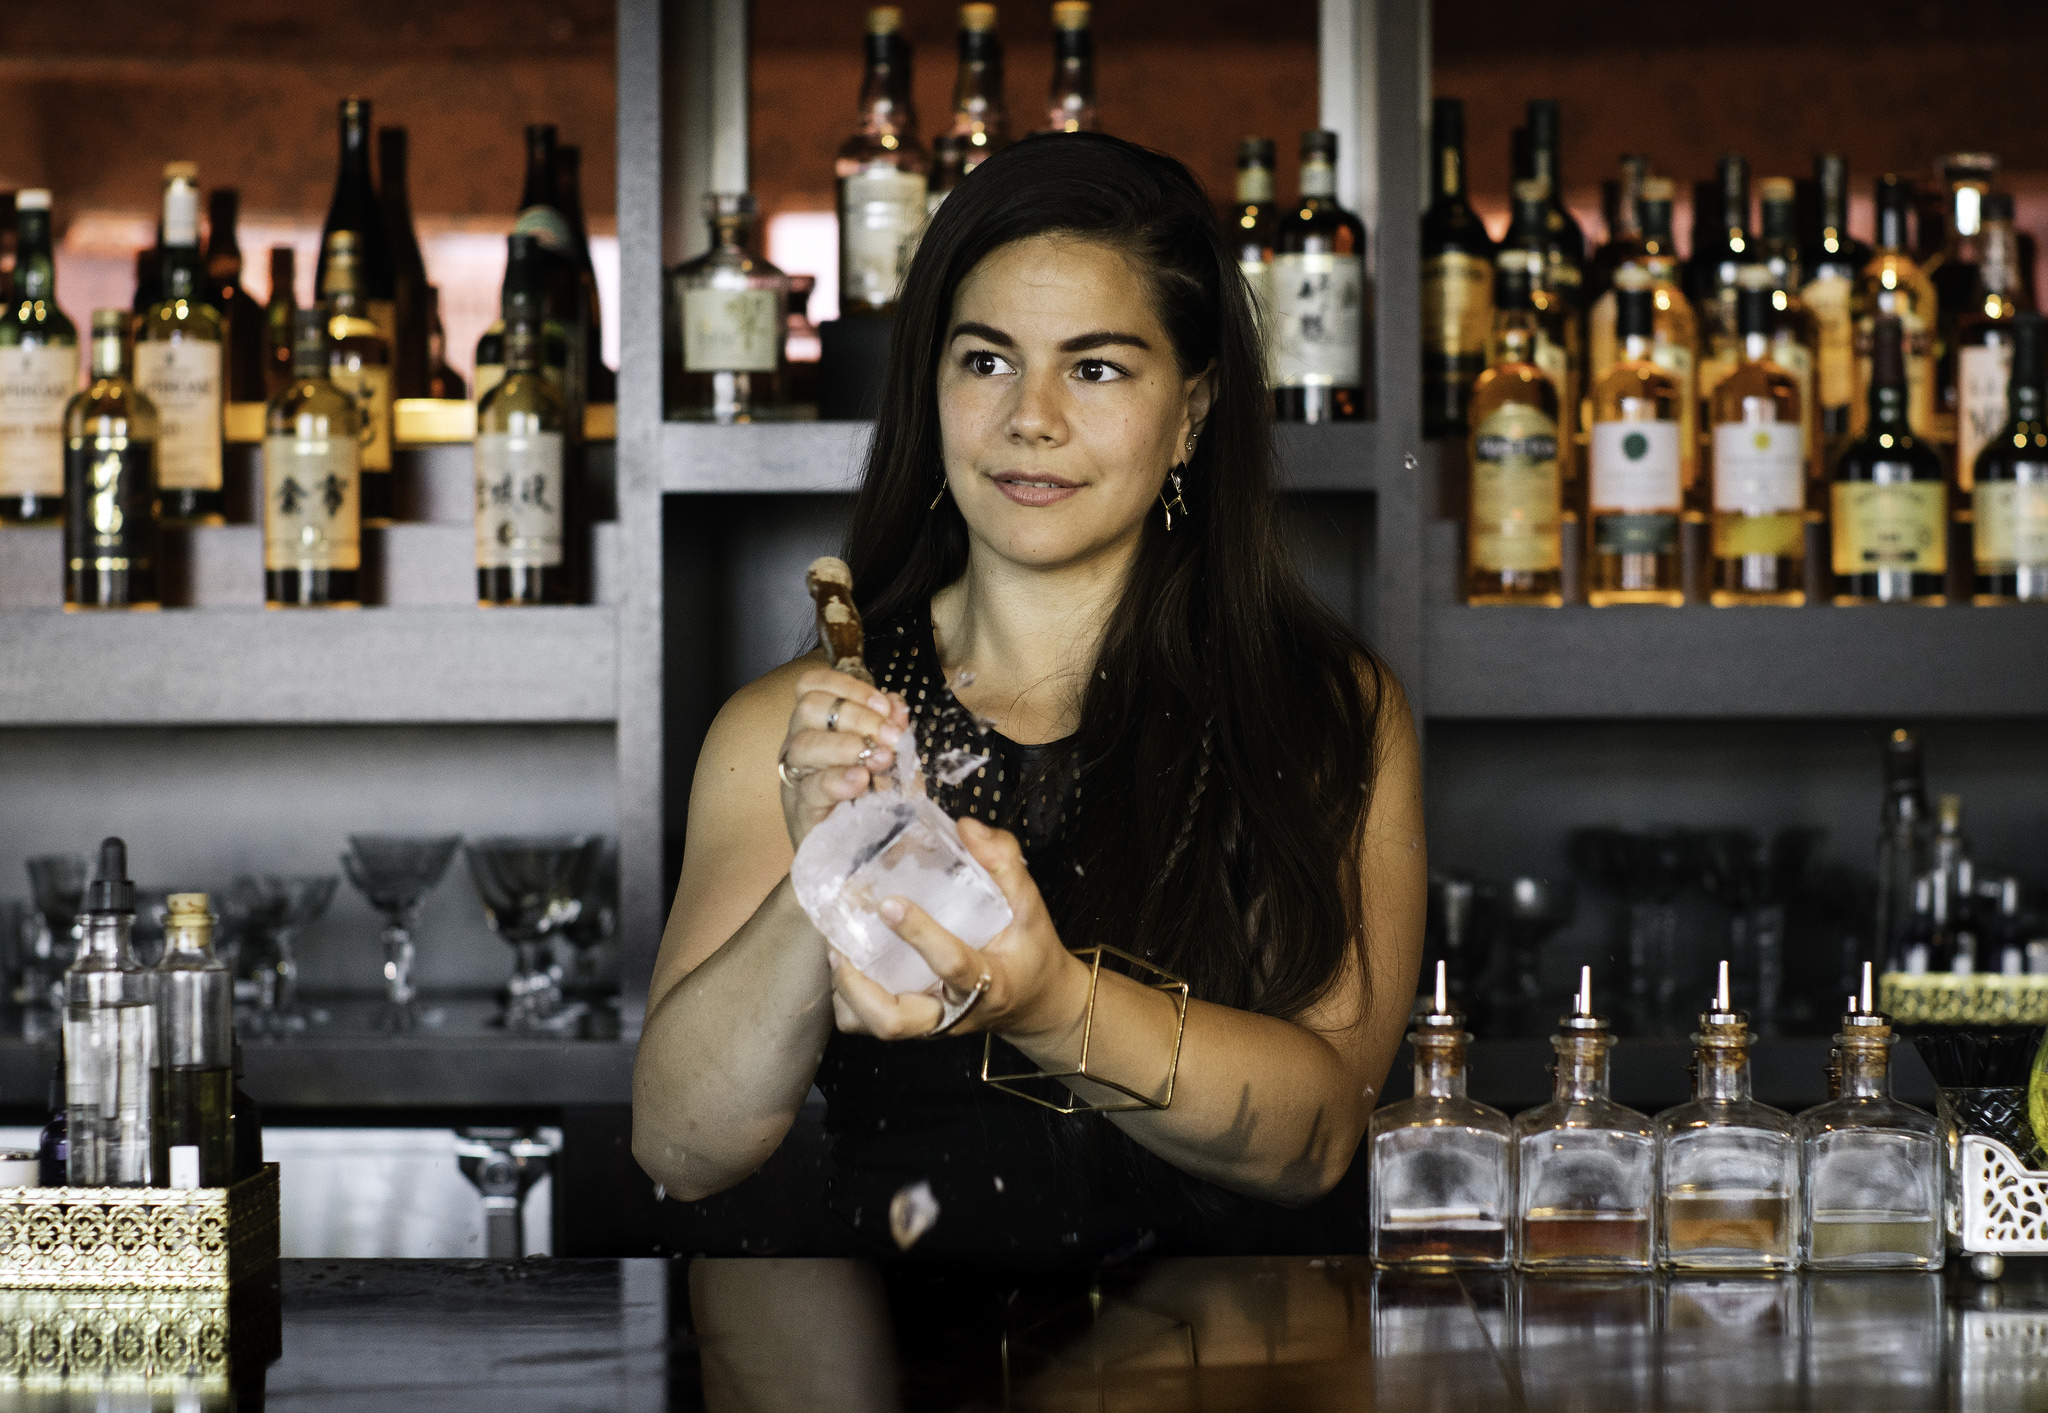 A woman stands behind a bar holding a cocktail shaker